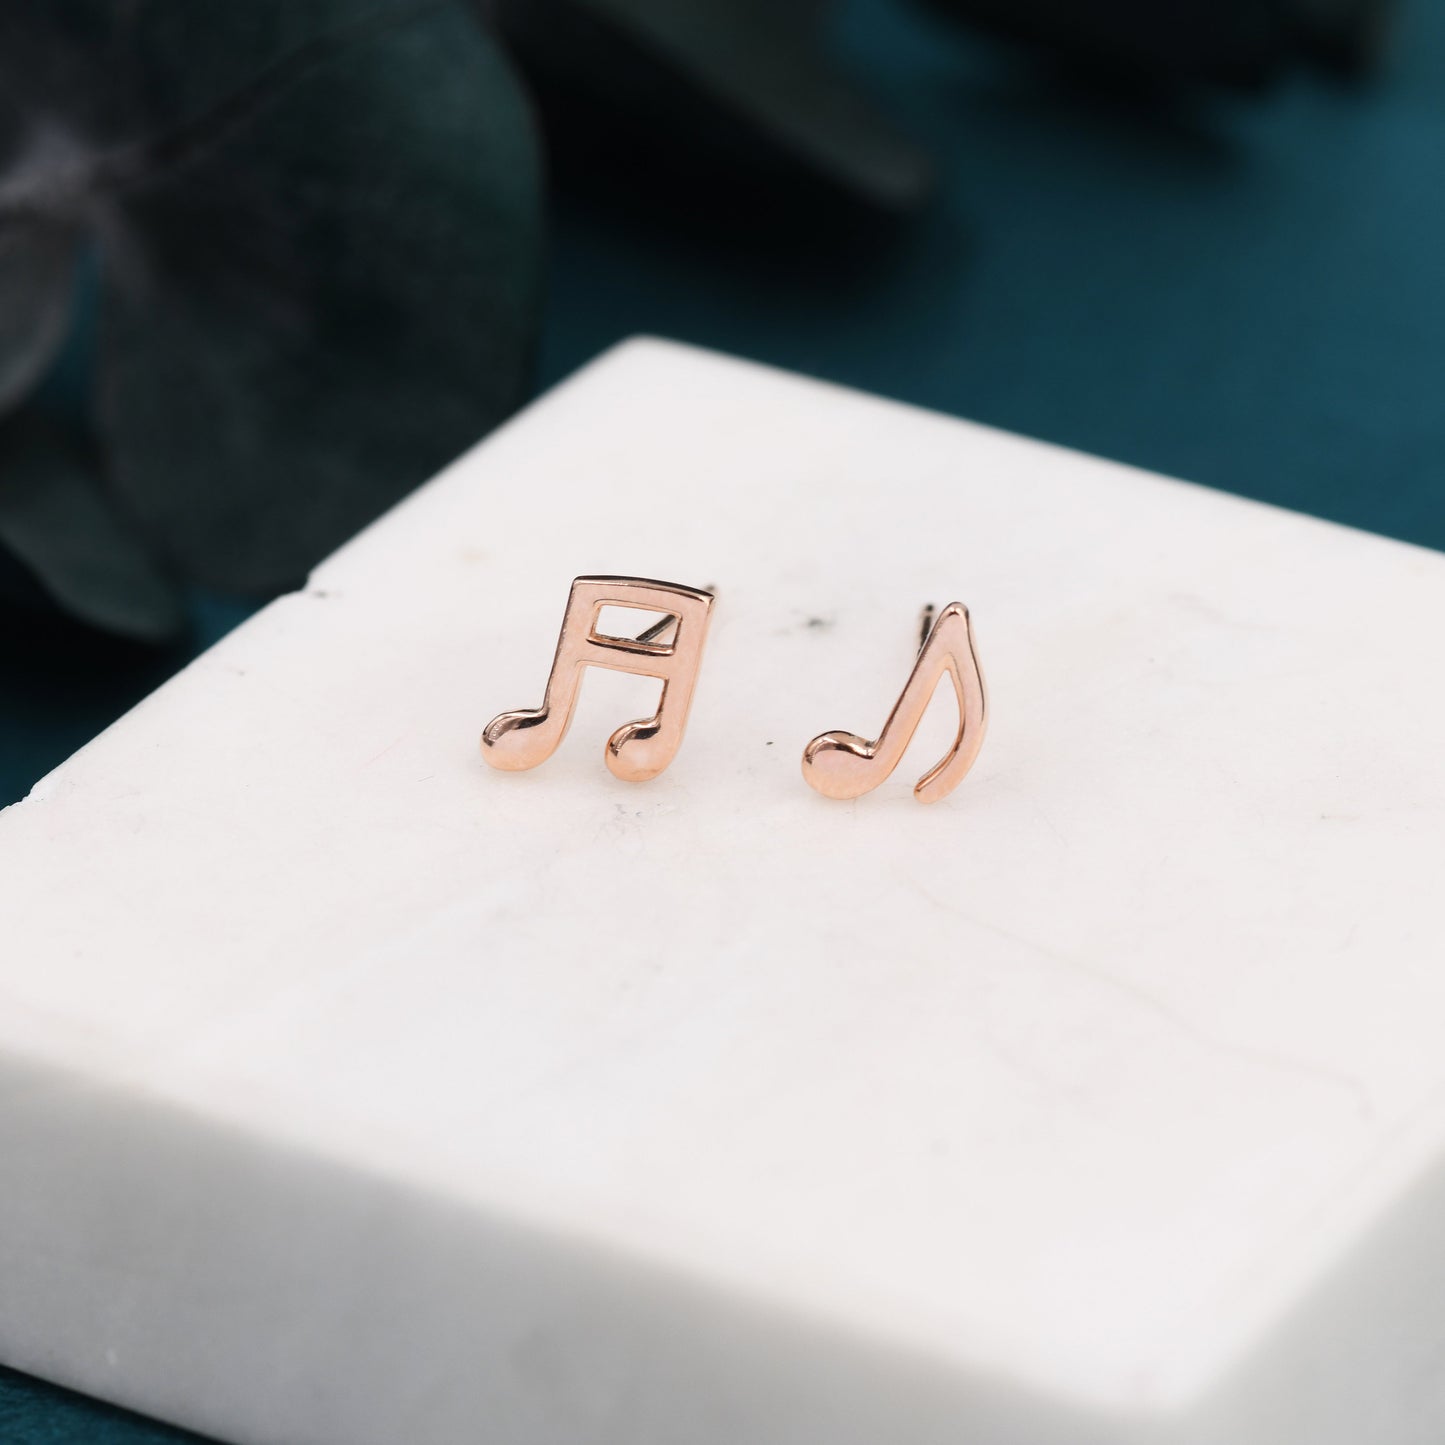 Mismatched Music Notes Stud Earrings in Sterling Silver, Music Symbol Stud Earrings, Cute Fun Earrings for Music Lover